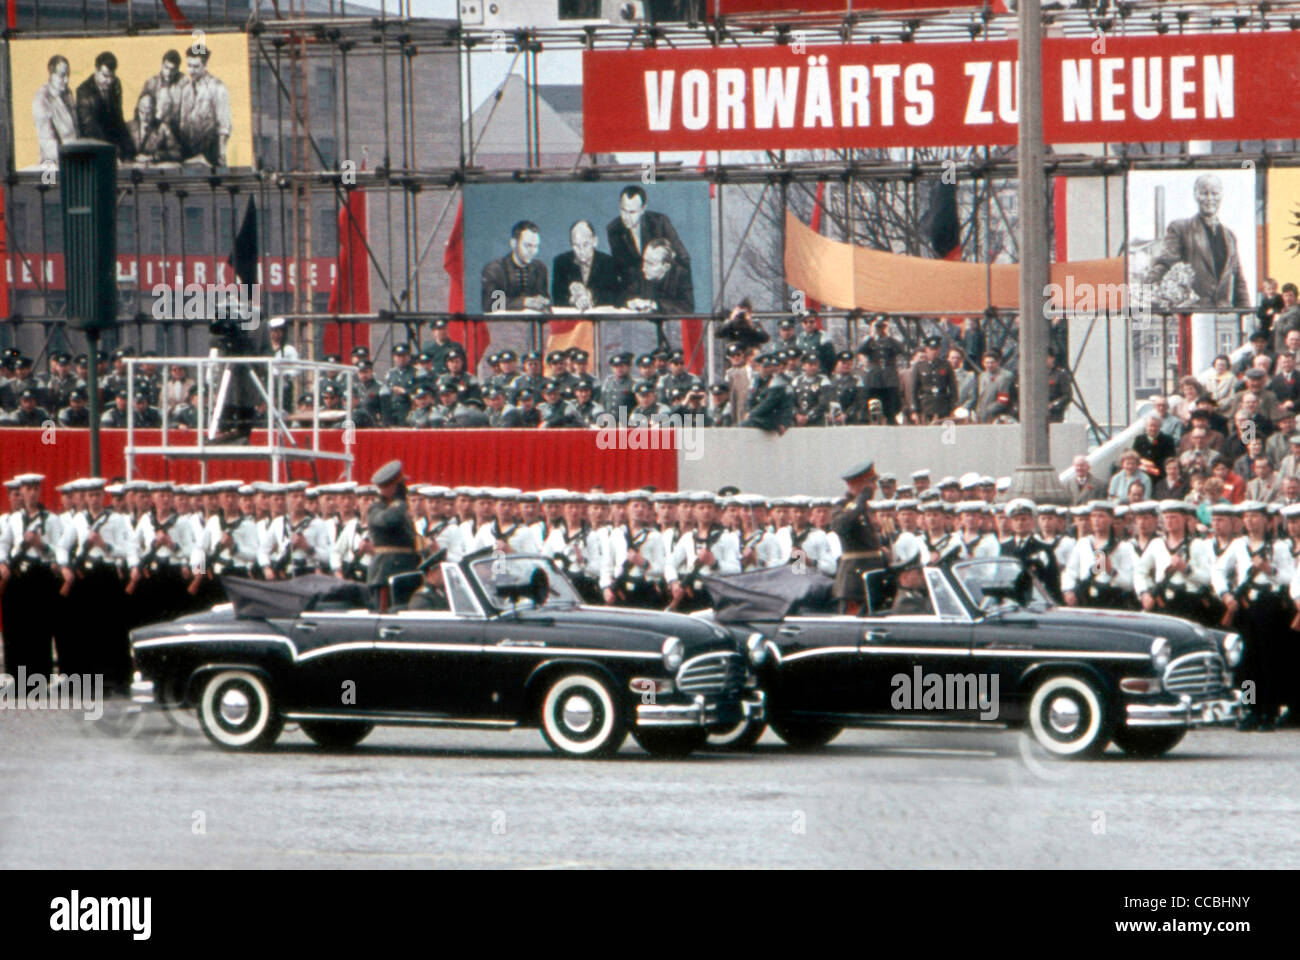 Military parade of the National People's Army NVA of the GDR 1960 in East Berlin. Stock Photo